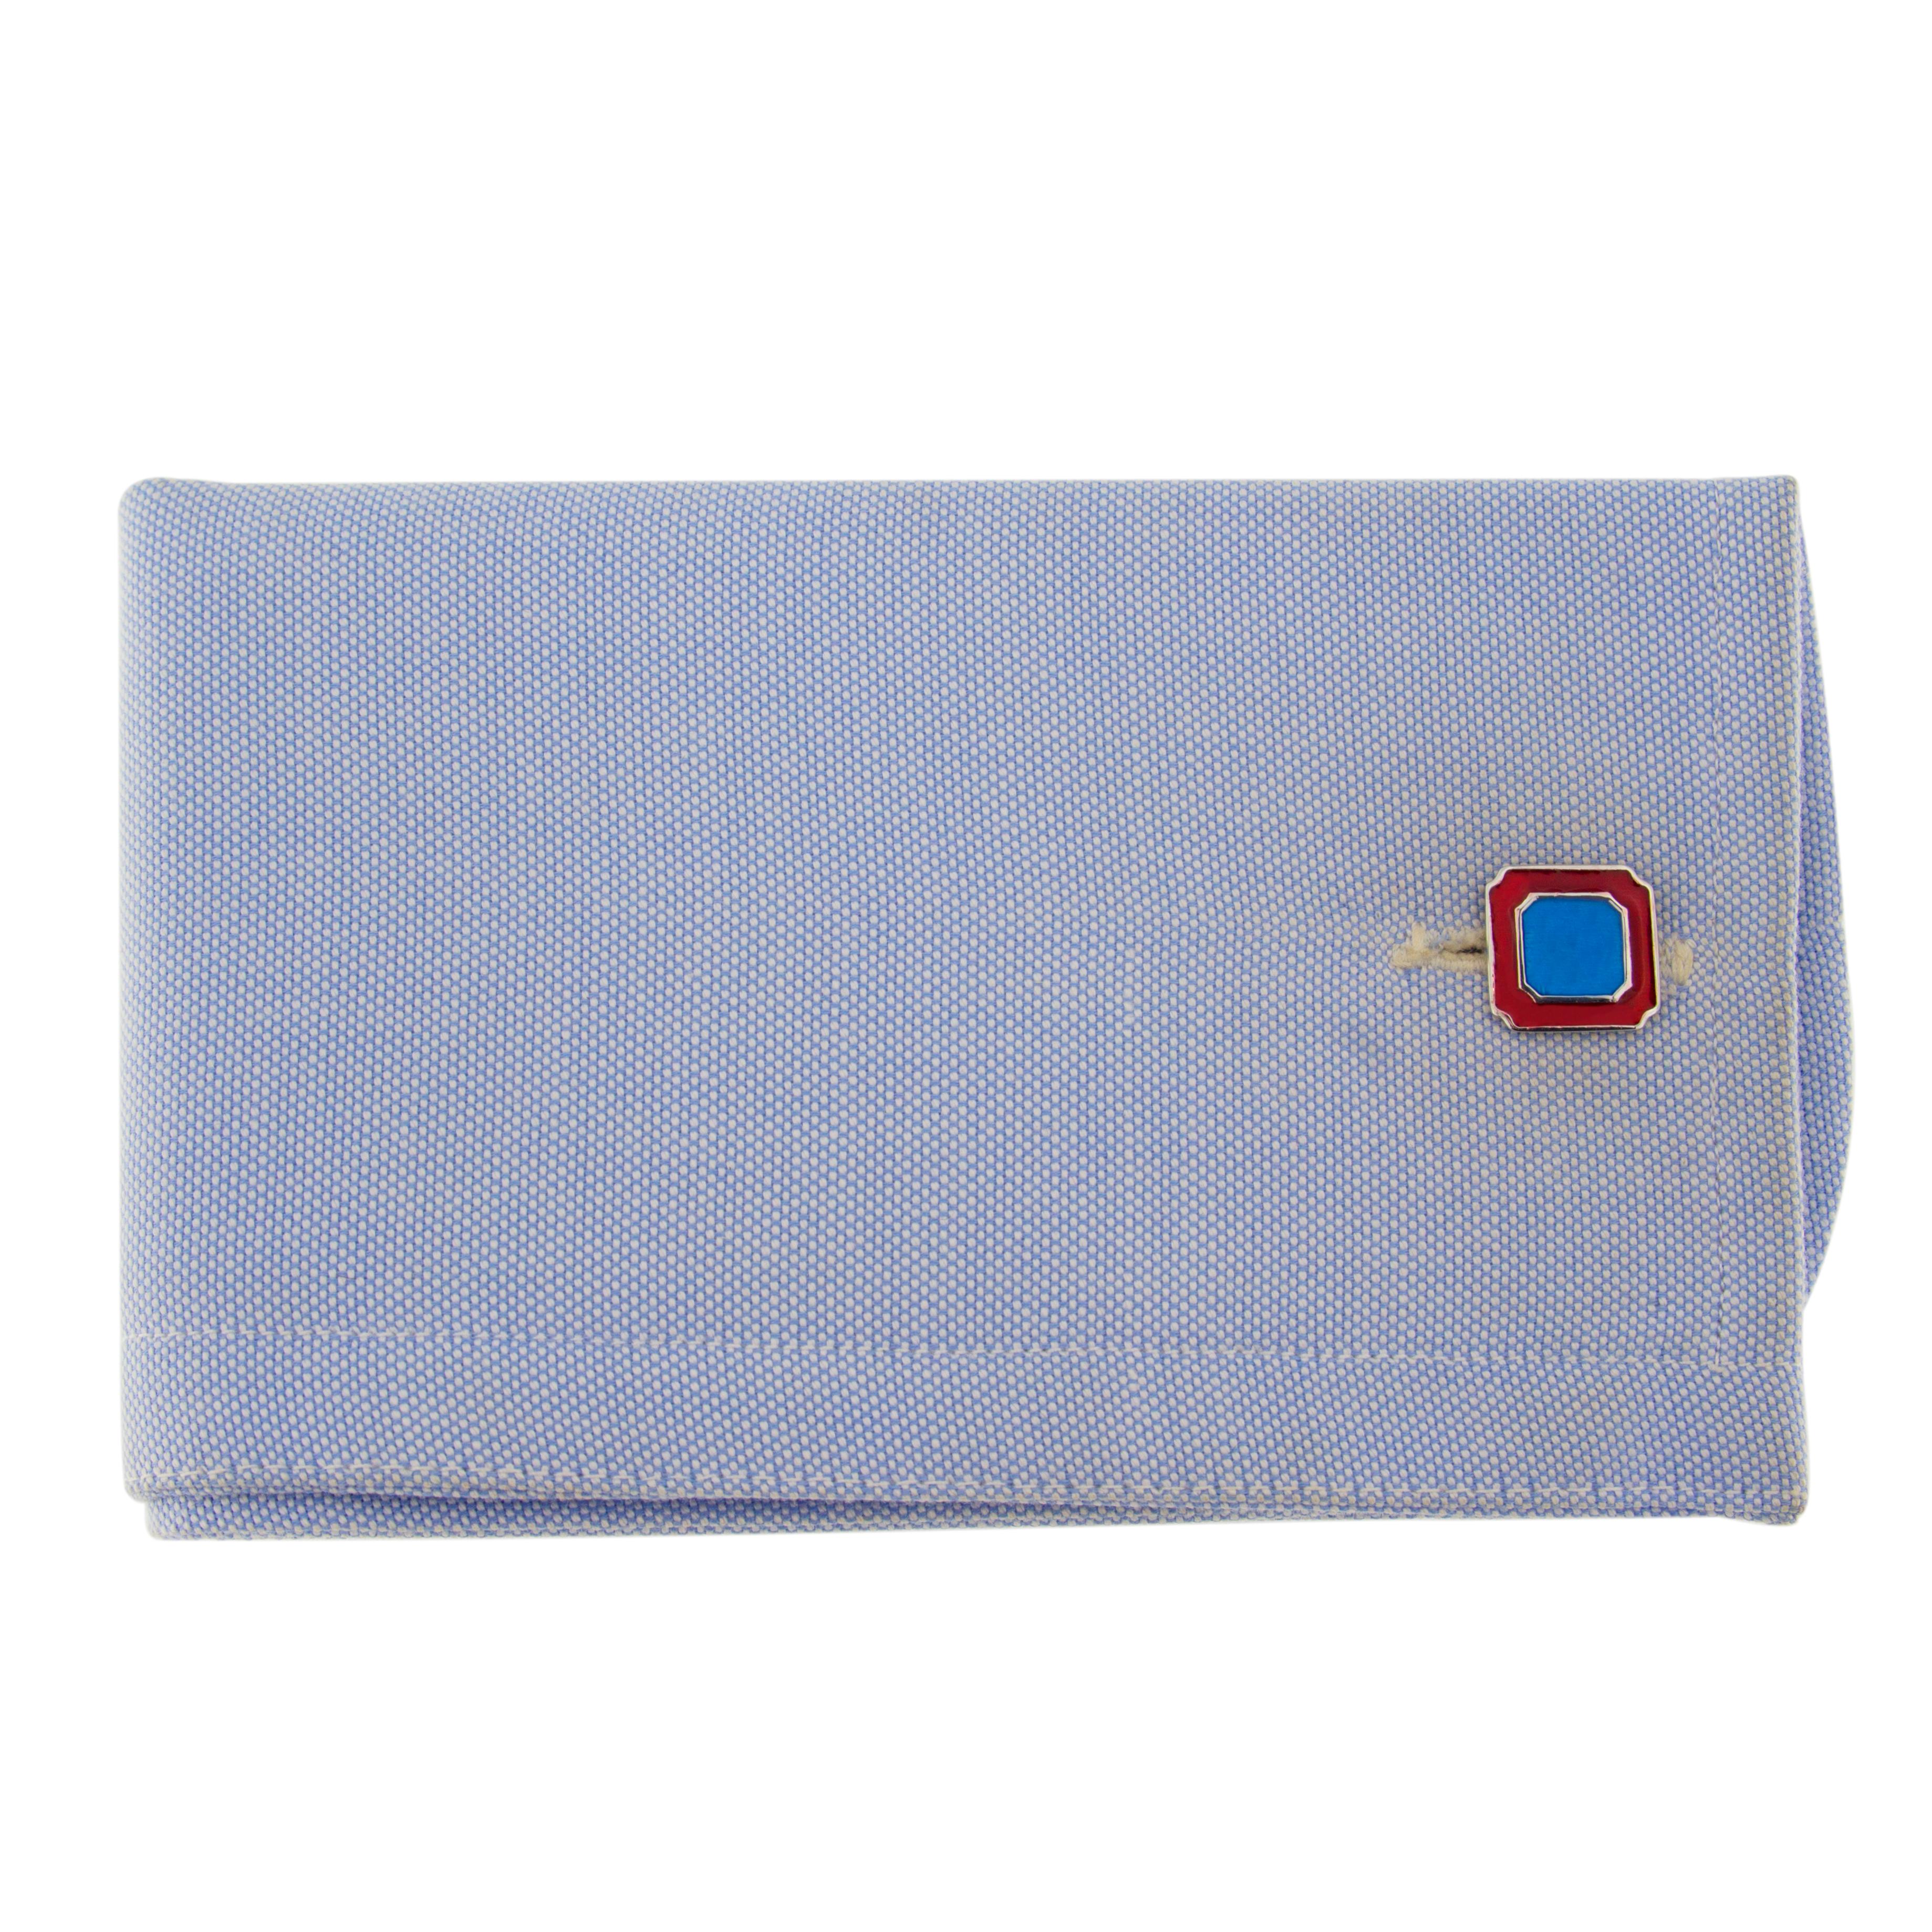 Jona design collection, hand crafted in Italy, sterling silver cufflinks with light blue enamel.Dimensions:
0.47 in. H x 0.47 in. W 
12 mm. H x 12 mm. W 
All Jona jewelry is new and has never been previously owned or worn. Each item will arrive at